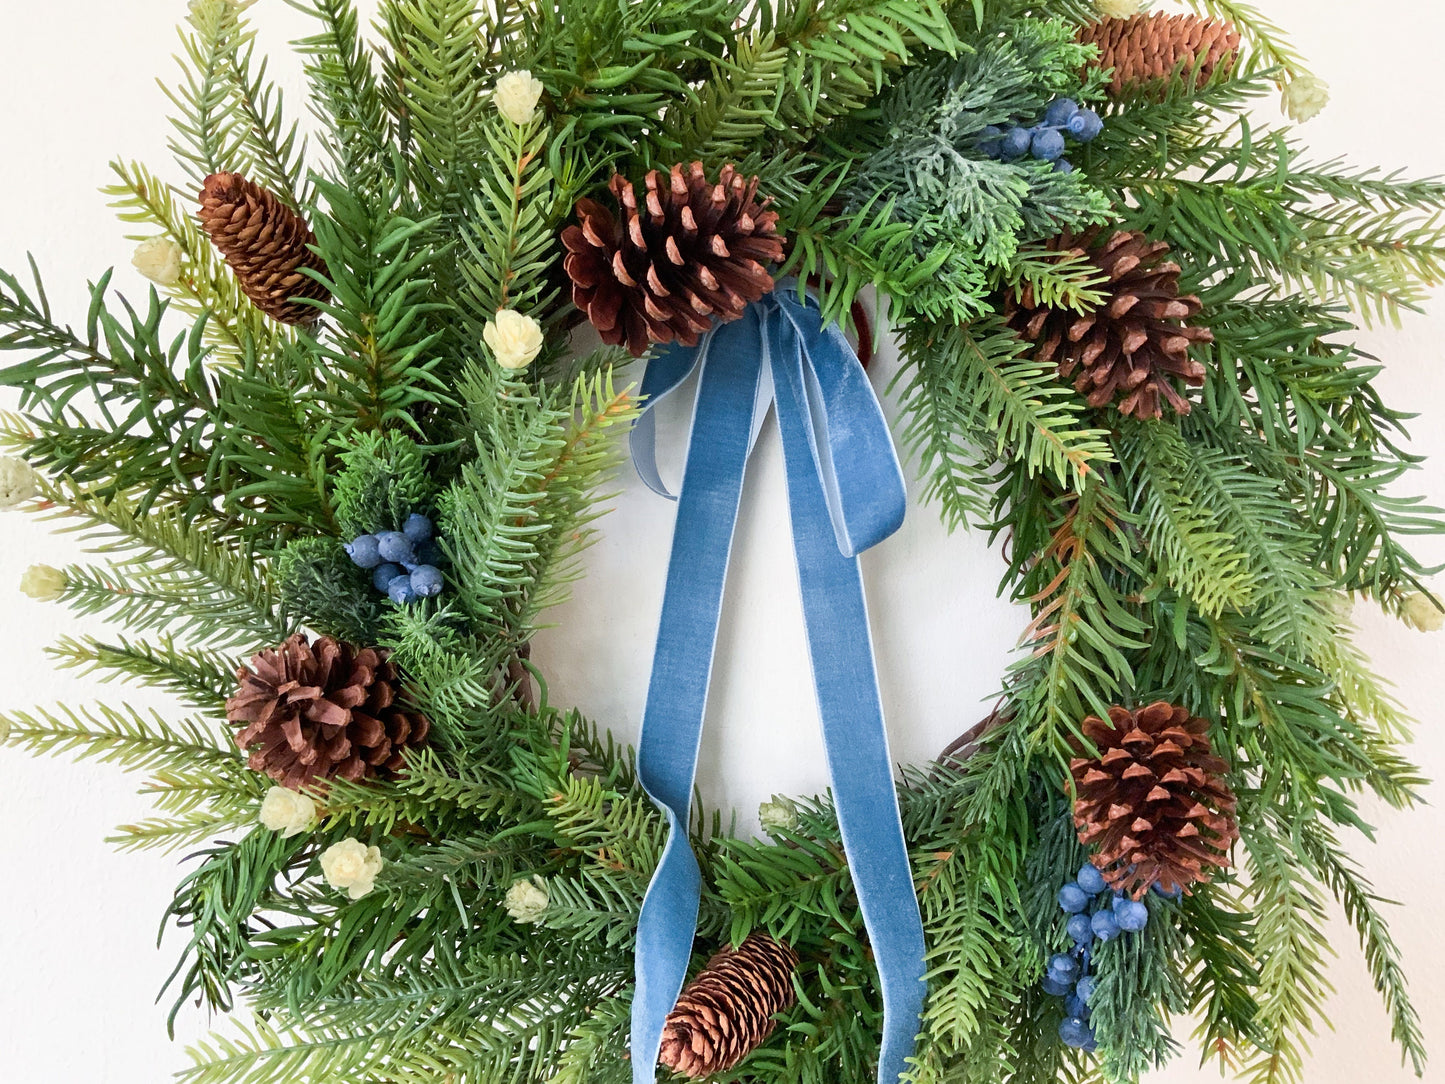 Classic Christmas Wreath w/ Blue Berries and Velvet Ribbon, Rustic Winter Evergreen Wreath w/ Pine for Front Door, Seasonal Home Decor,